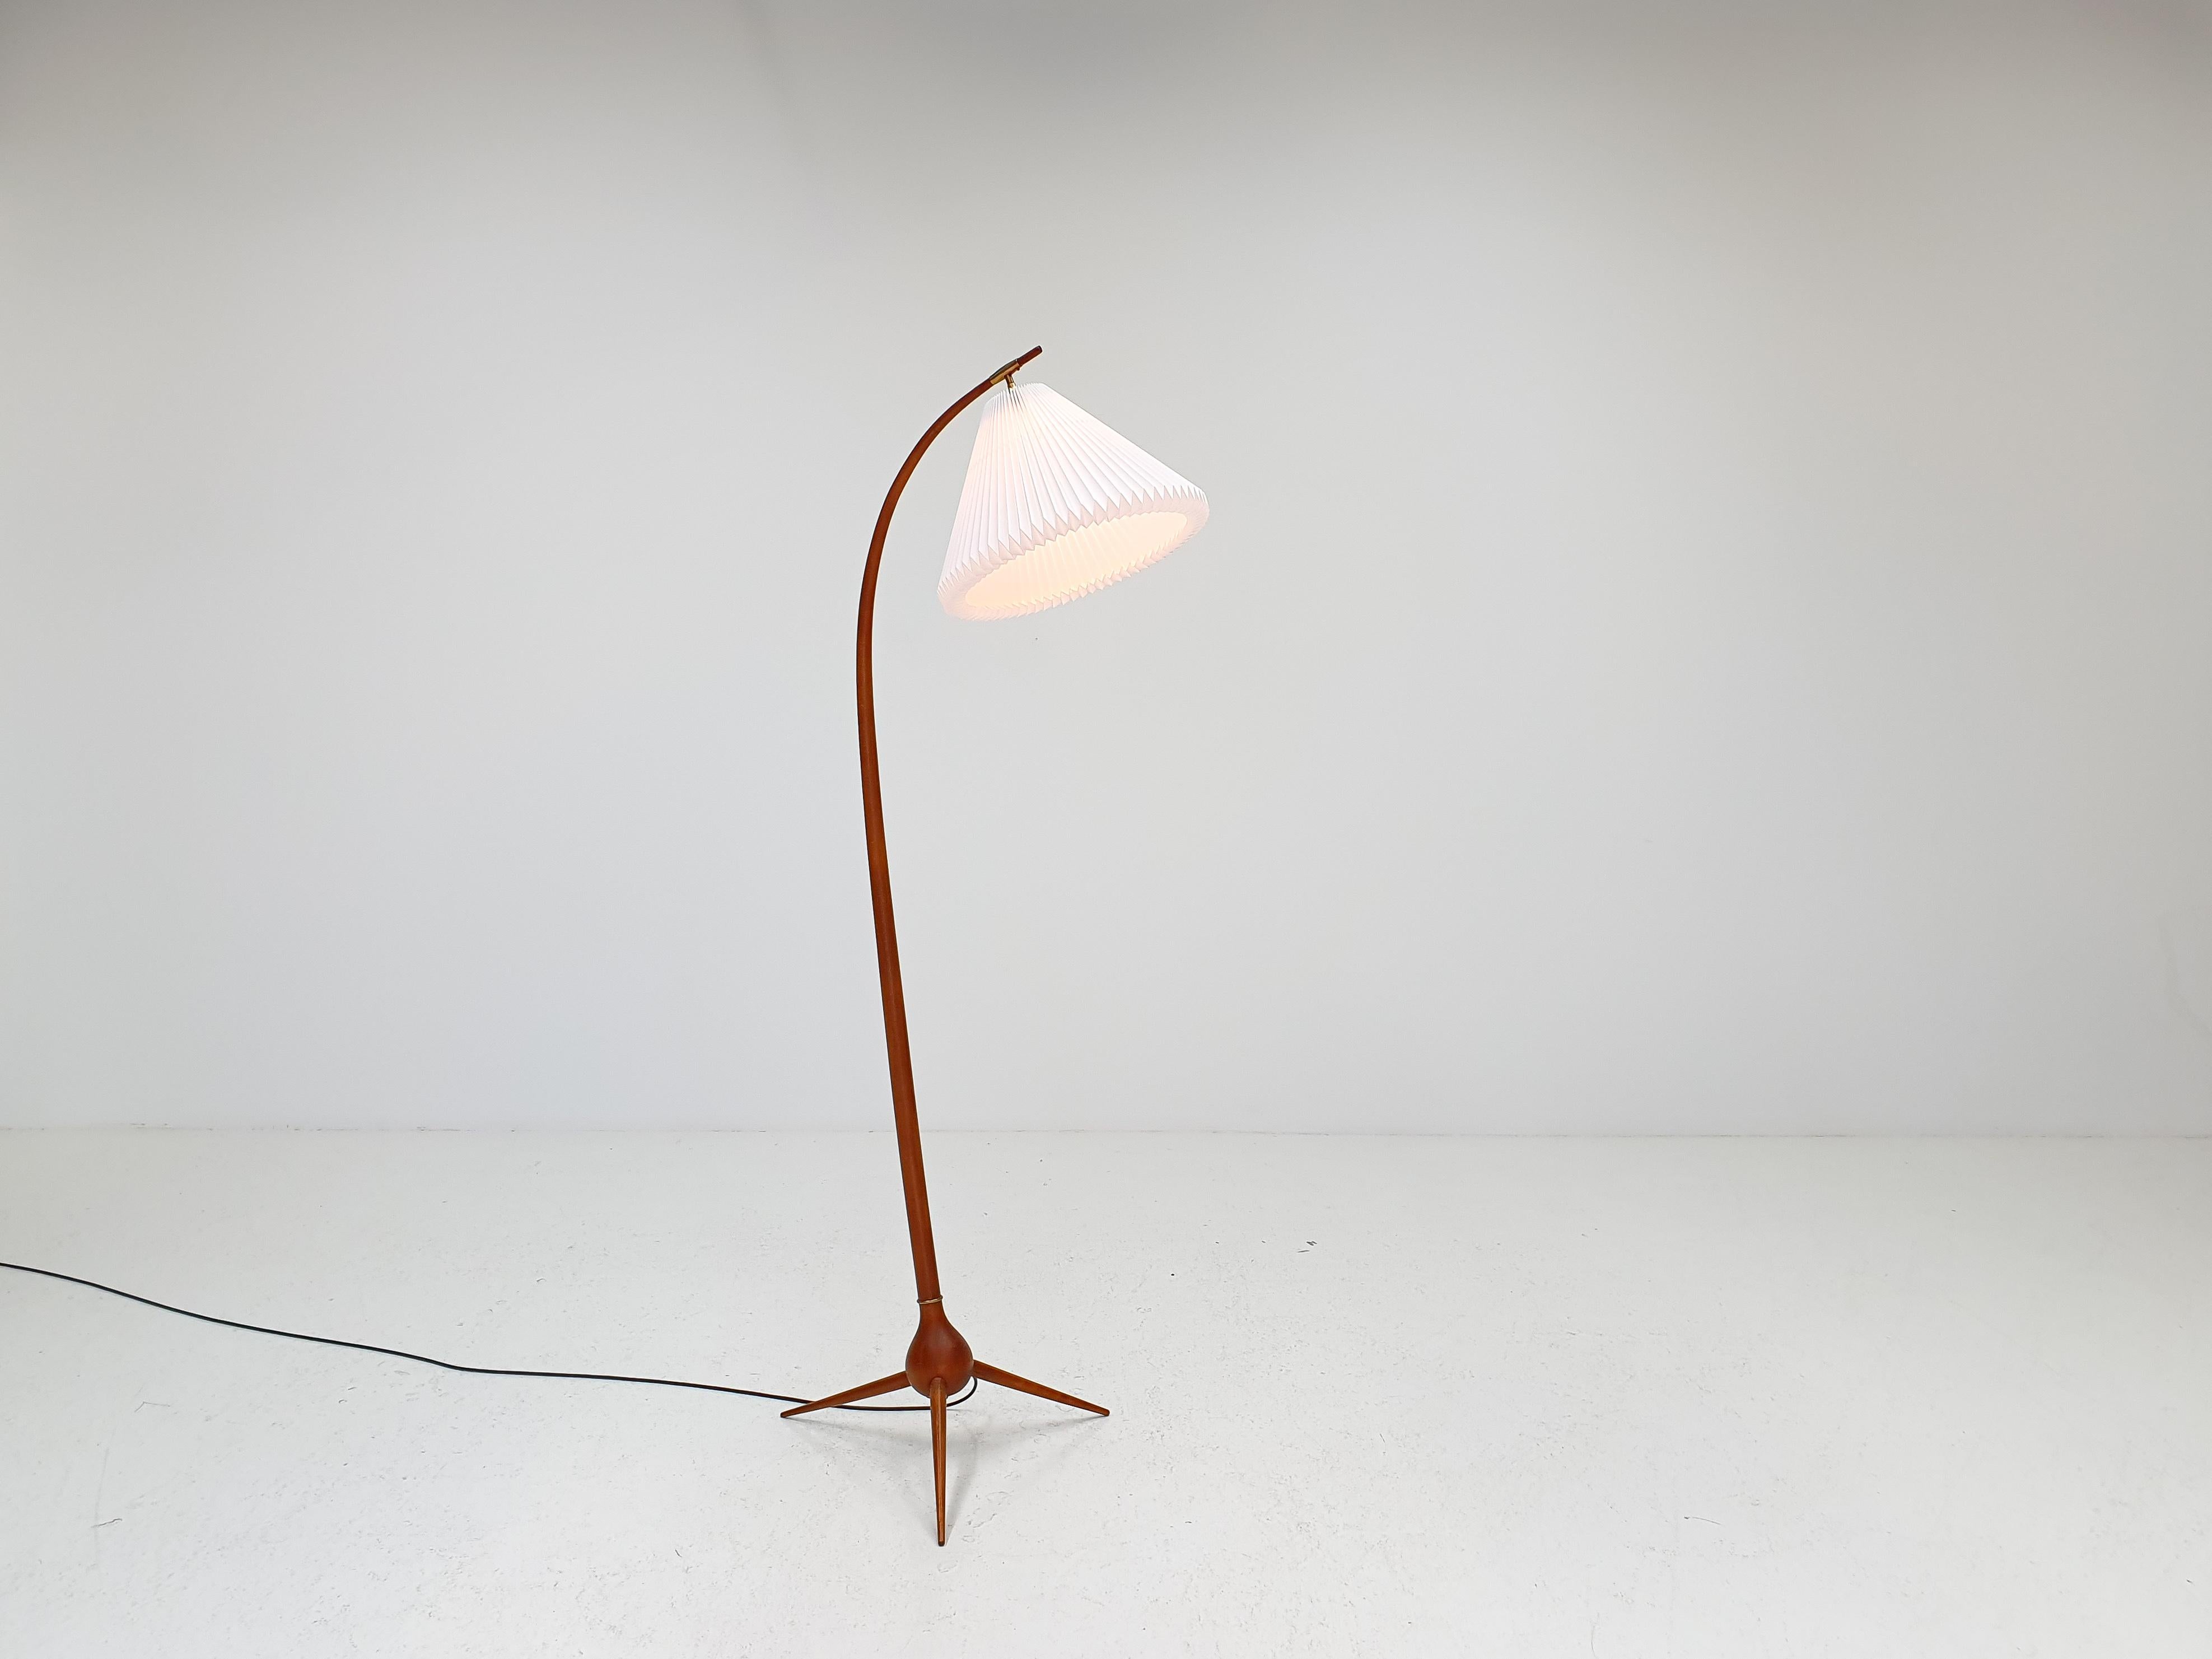 A beech and brass floor lamp designed by Severin Hansen for Haslev Furniture. The piece was manufactured in Denmark in the 1950s.

The floor lamp stands elegantly on tripod legs and has a curved Stand with brass fittings holding the new handmade